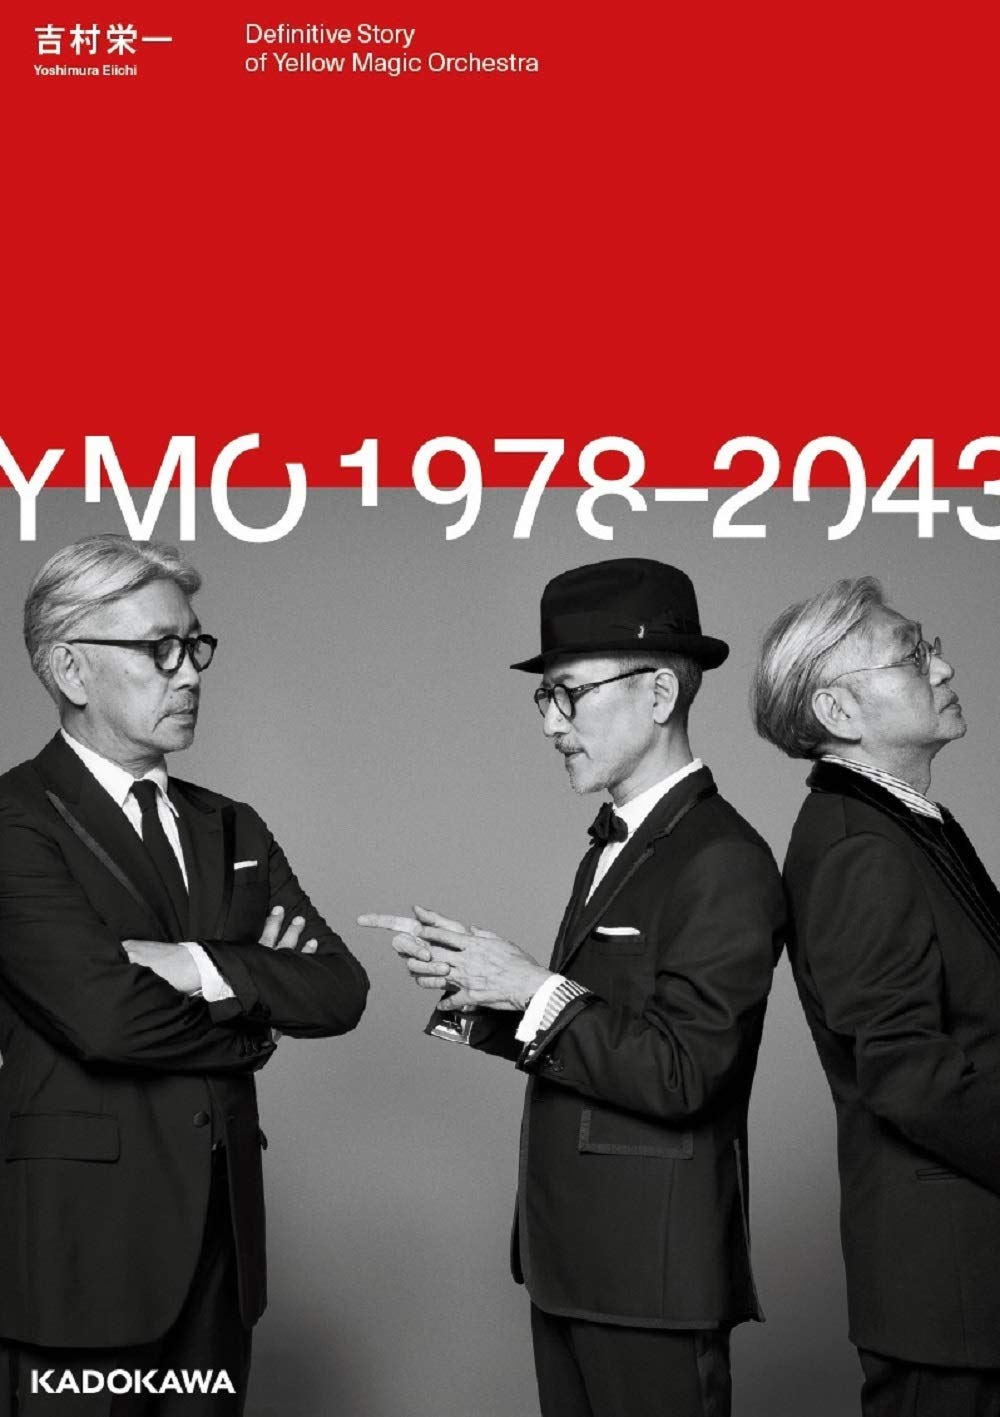 YMO 1978-2043 Definitive Story of Yellow Magic Orchestra (paperback)